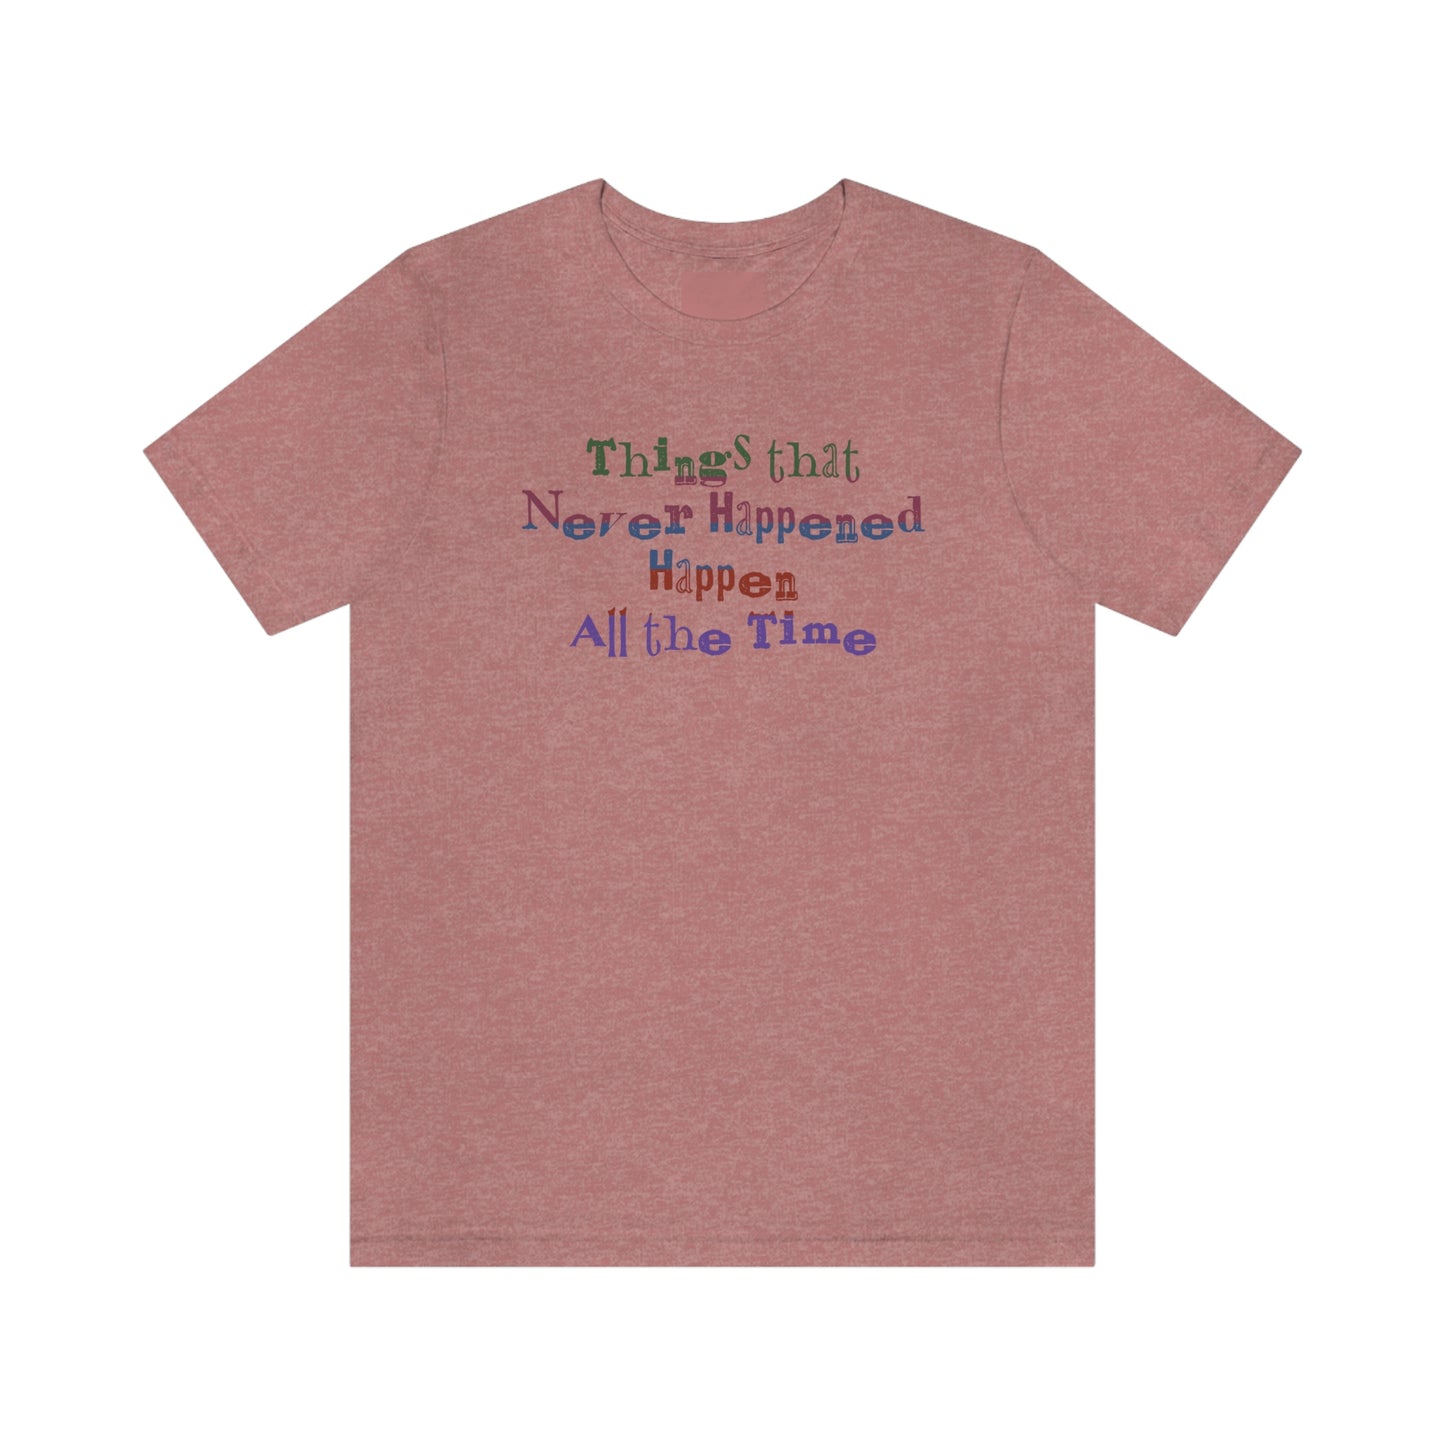 Things that Never Happened Happen All the Time - Unisex T-Shirt